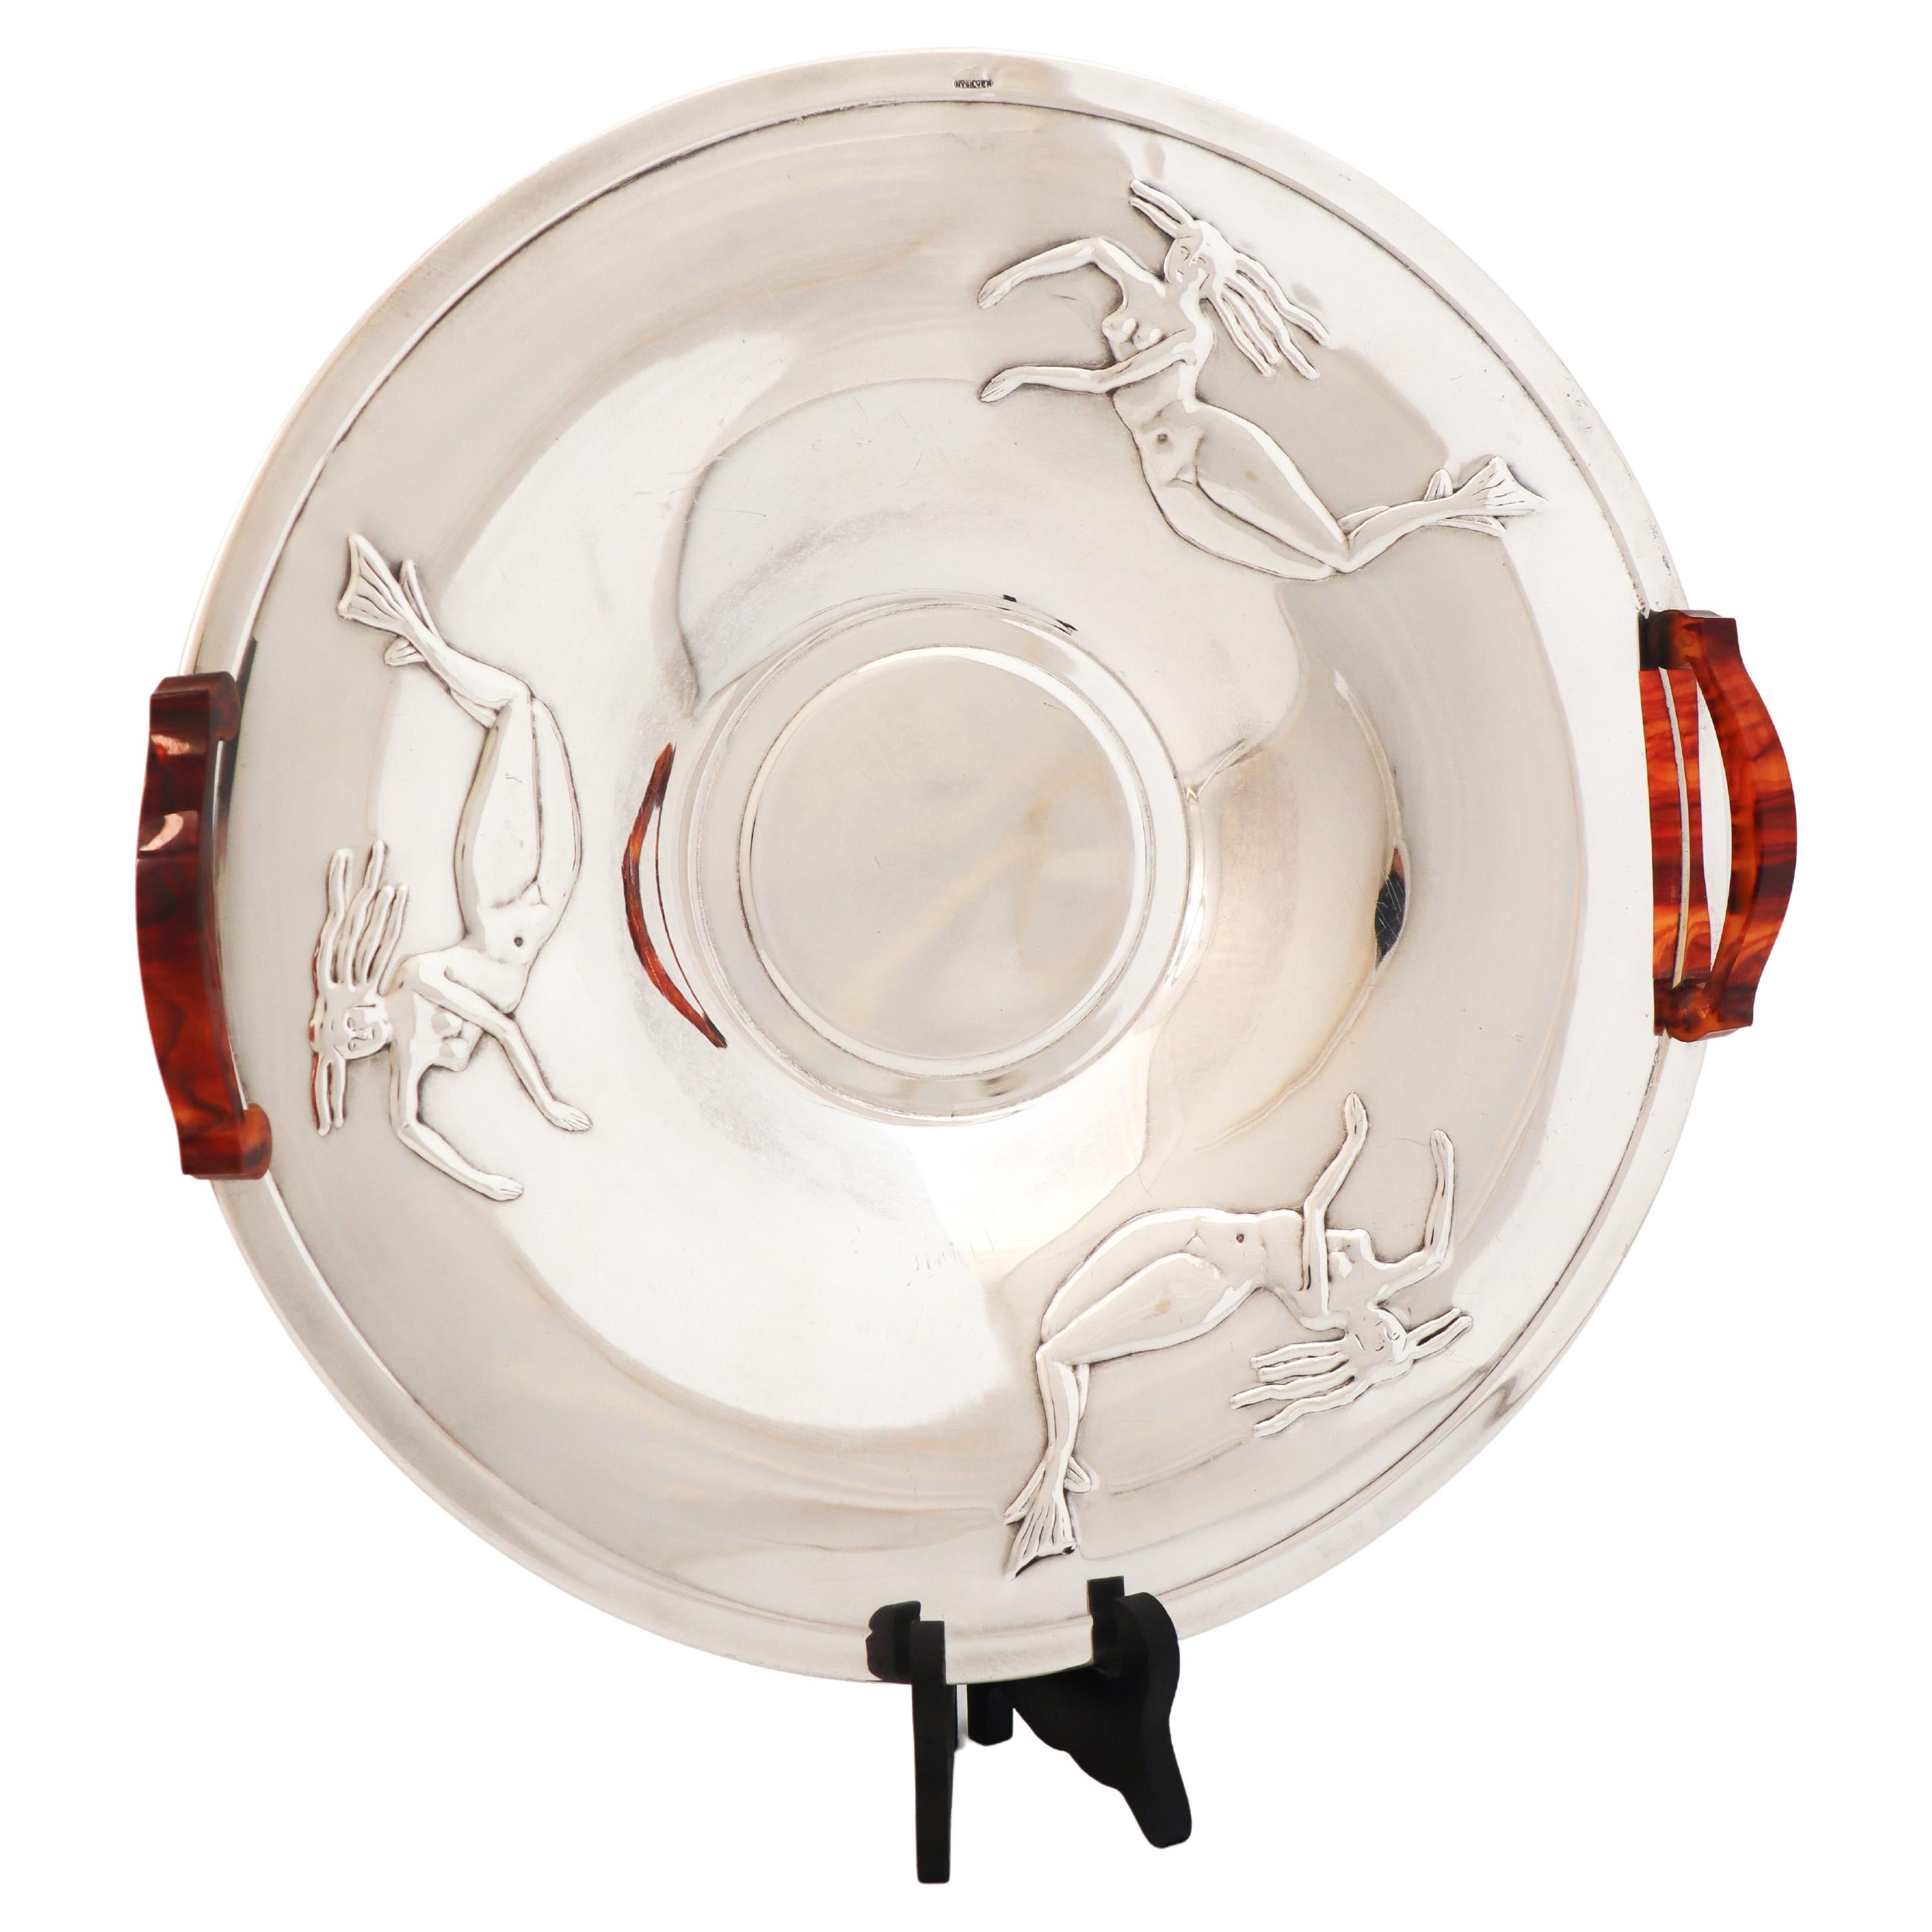 Silver Plated Bowl - Art Deco / Swedish Modern 1930-1940s - Mermaids For Sale